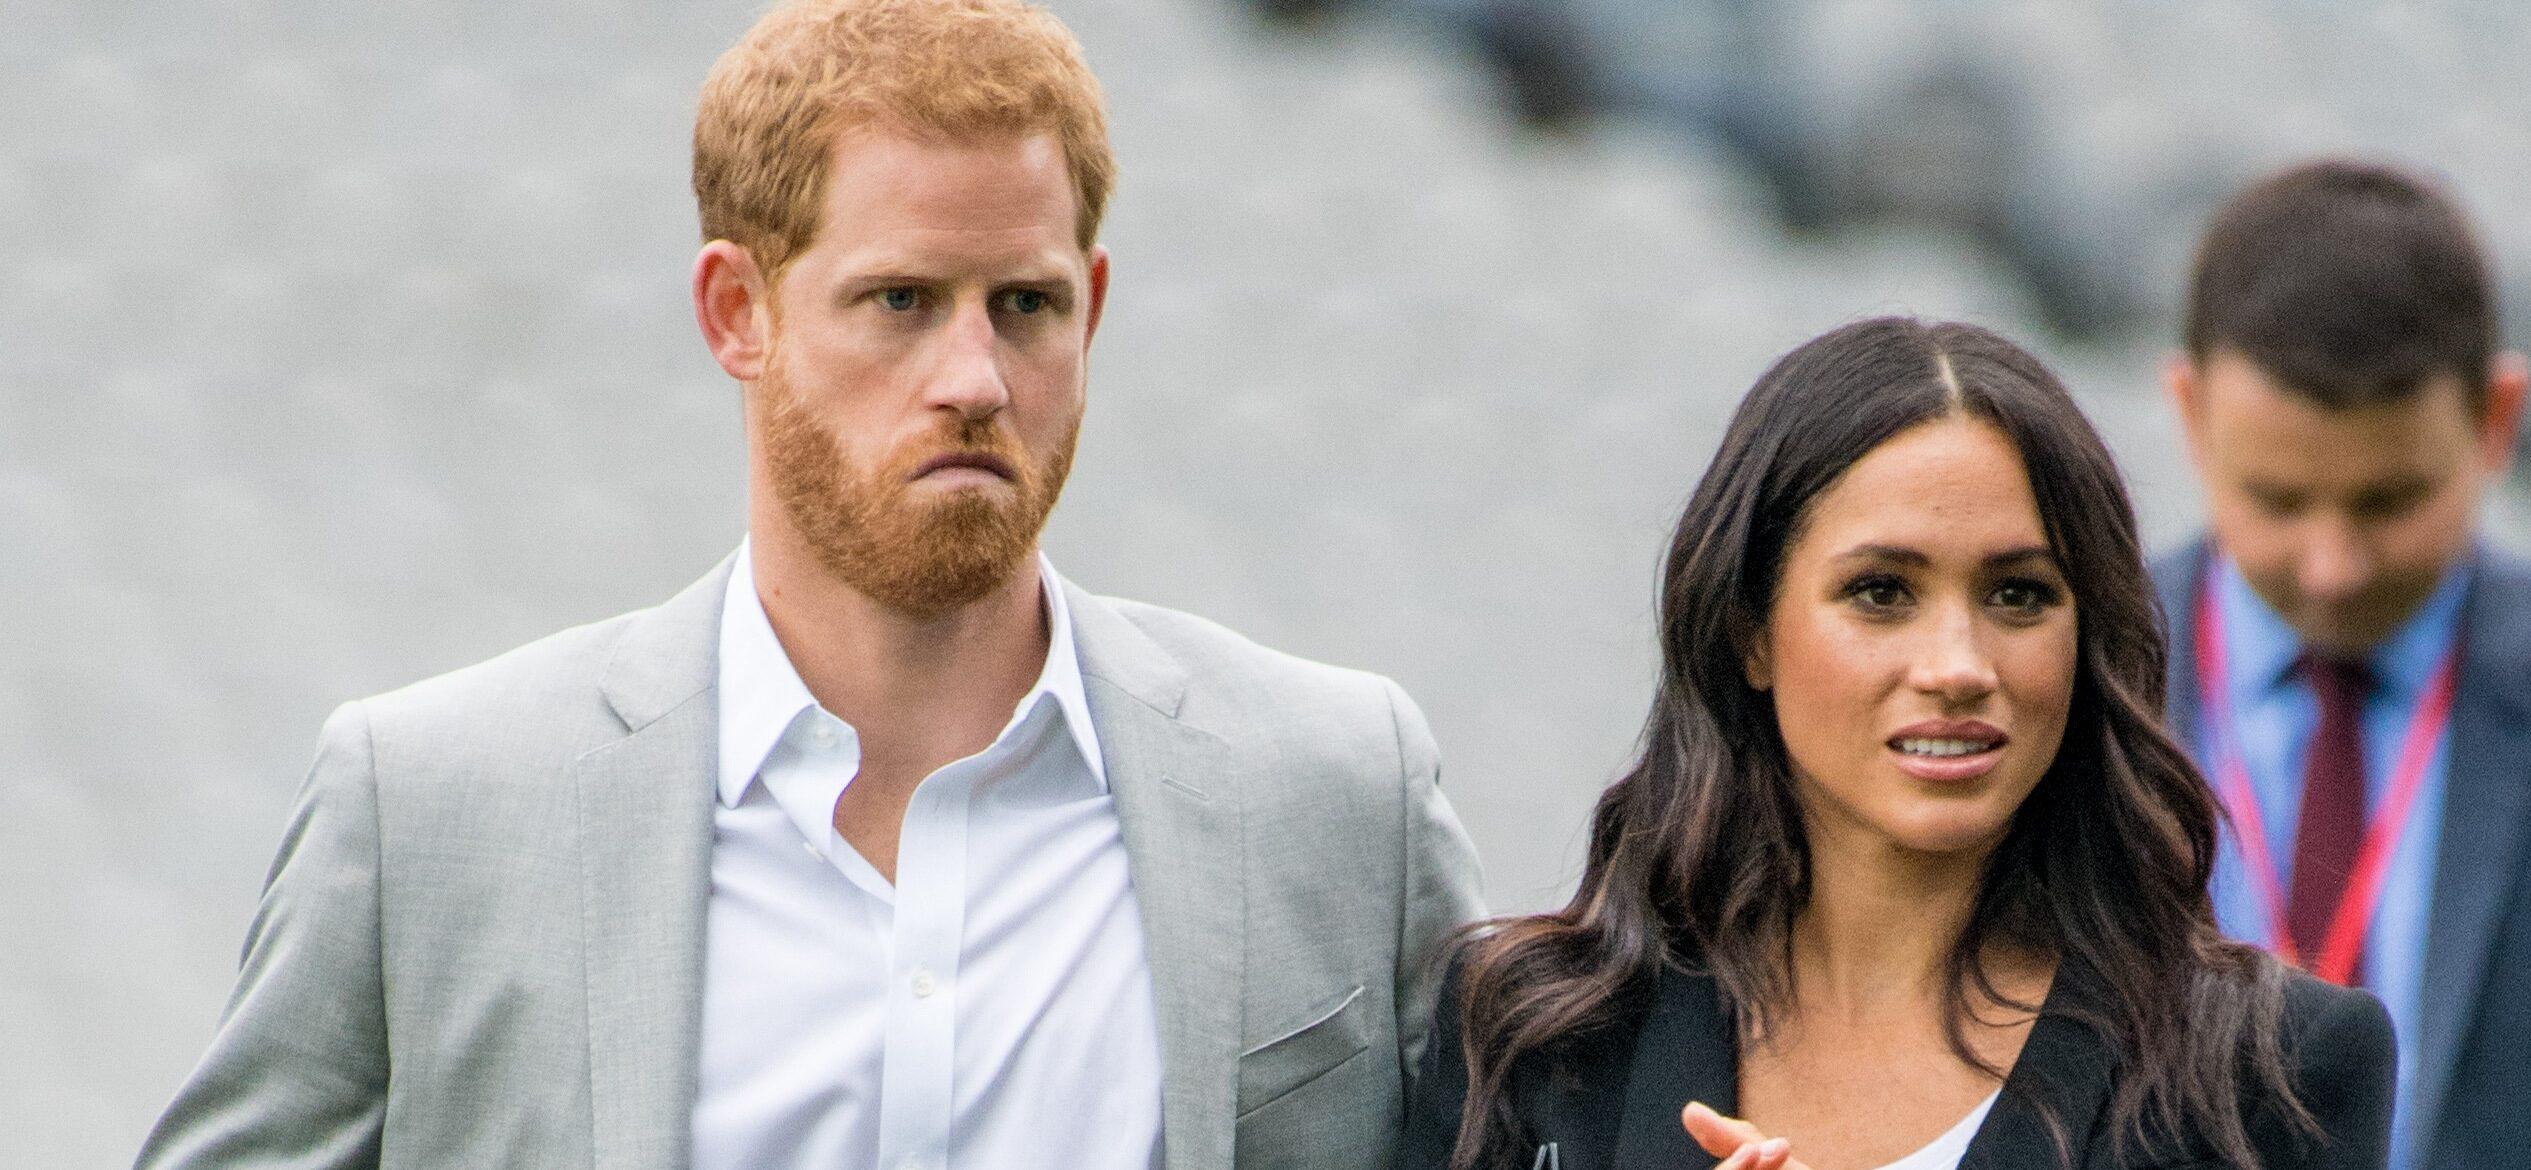 Prince Harry Could Lose His Royal Title If He Becomes A U.S. Citizen